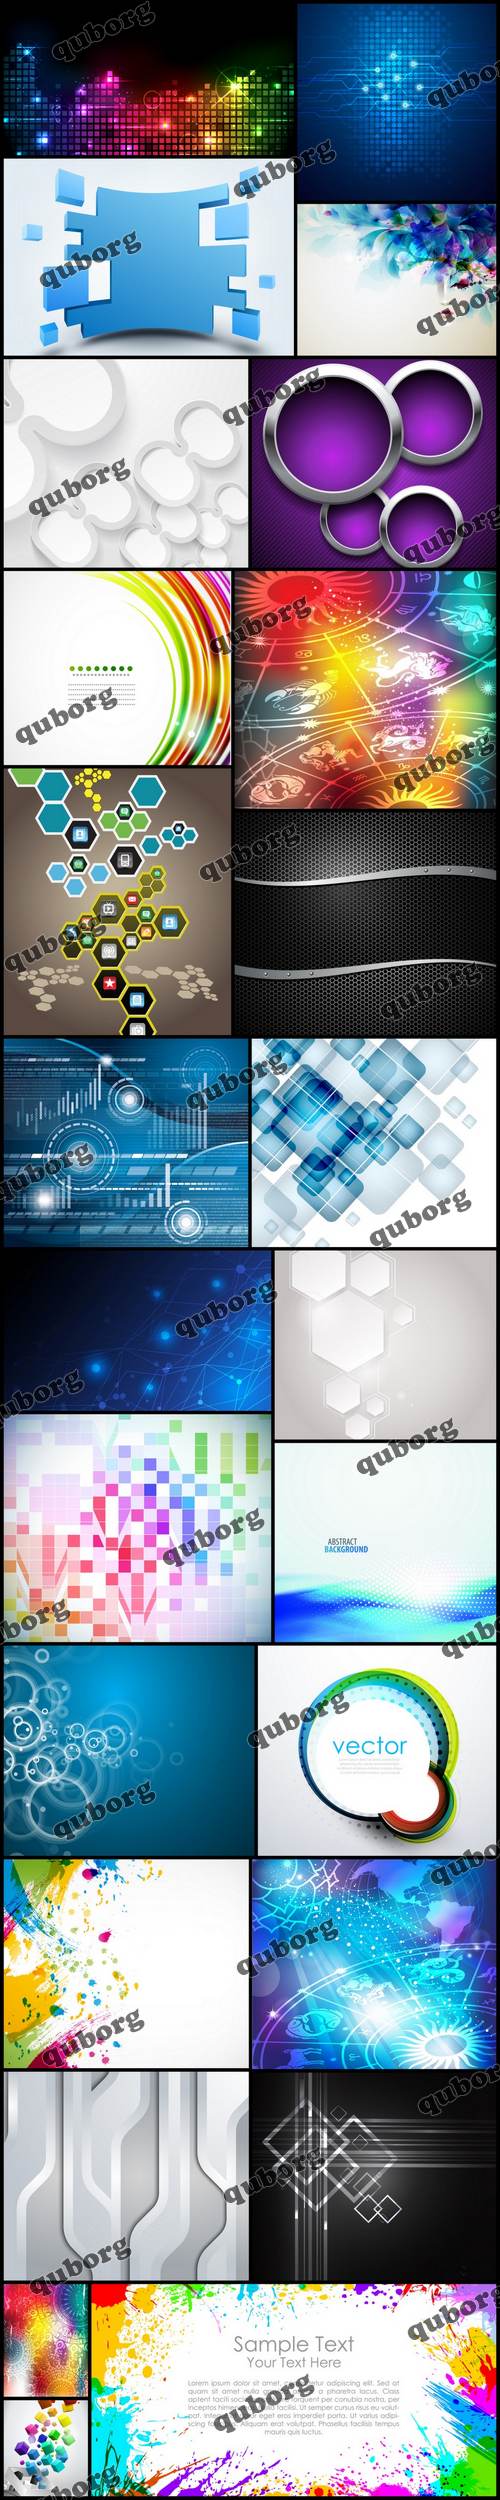 Stock Vector - Collection of Vector Abstract Backgrounds 46